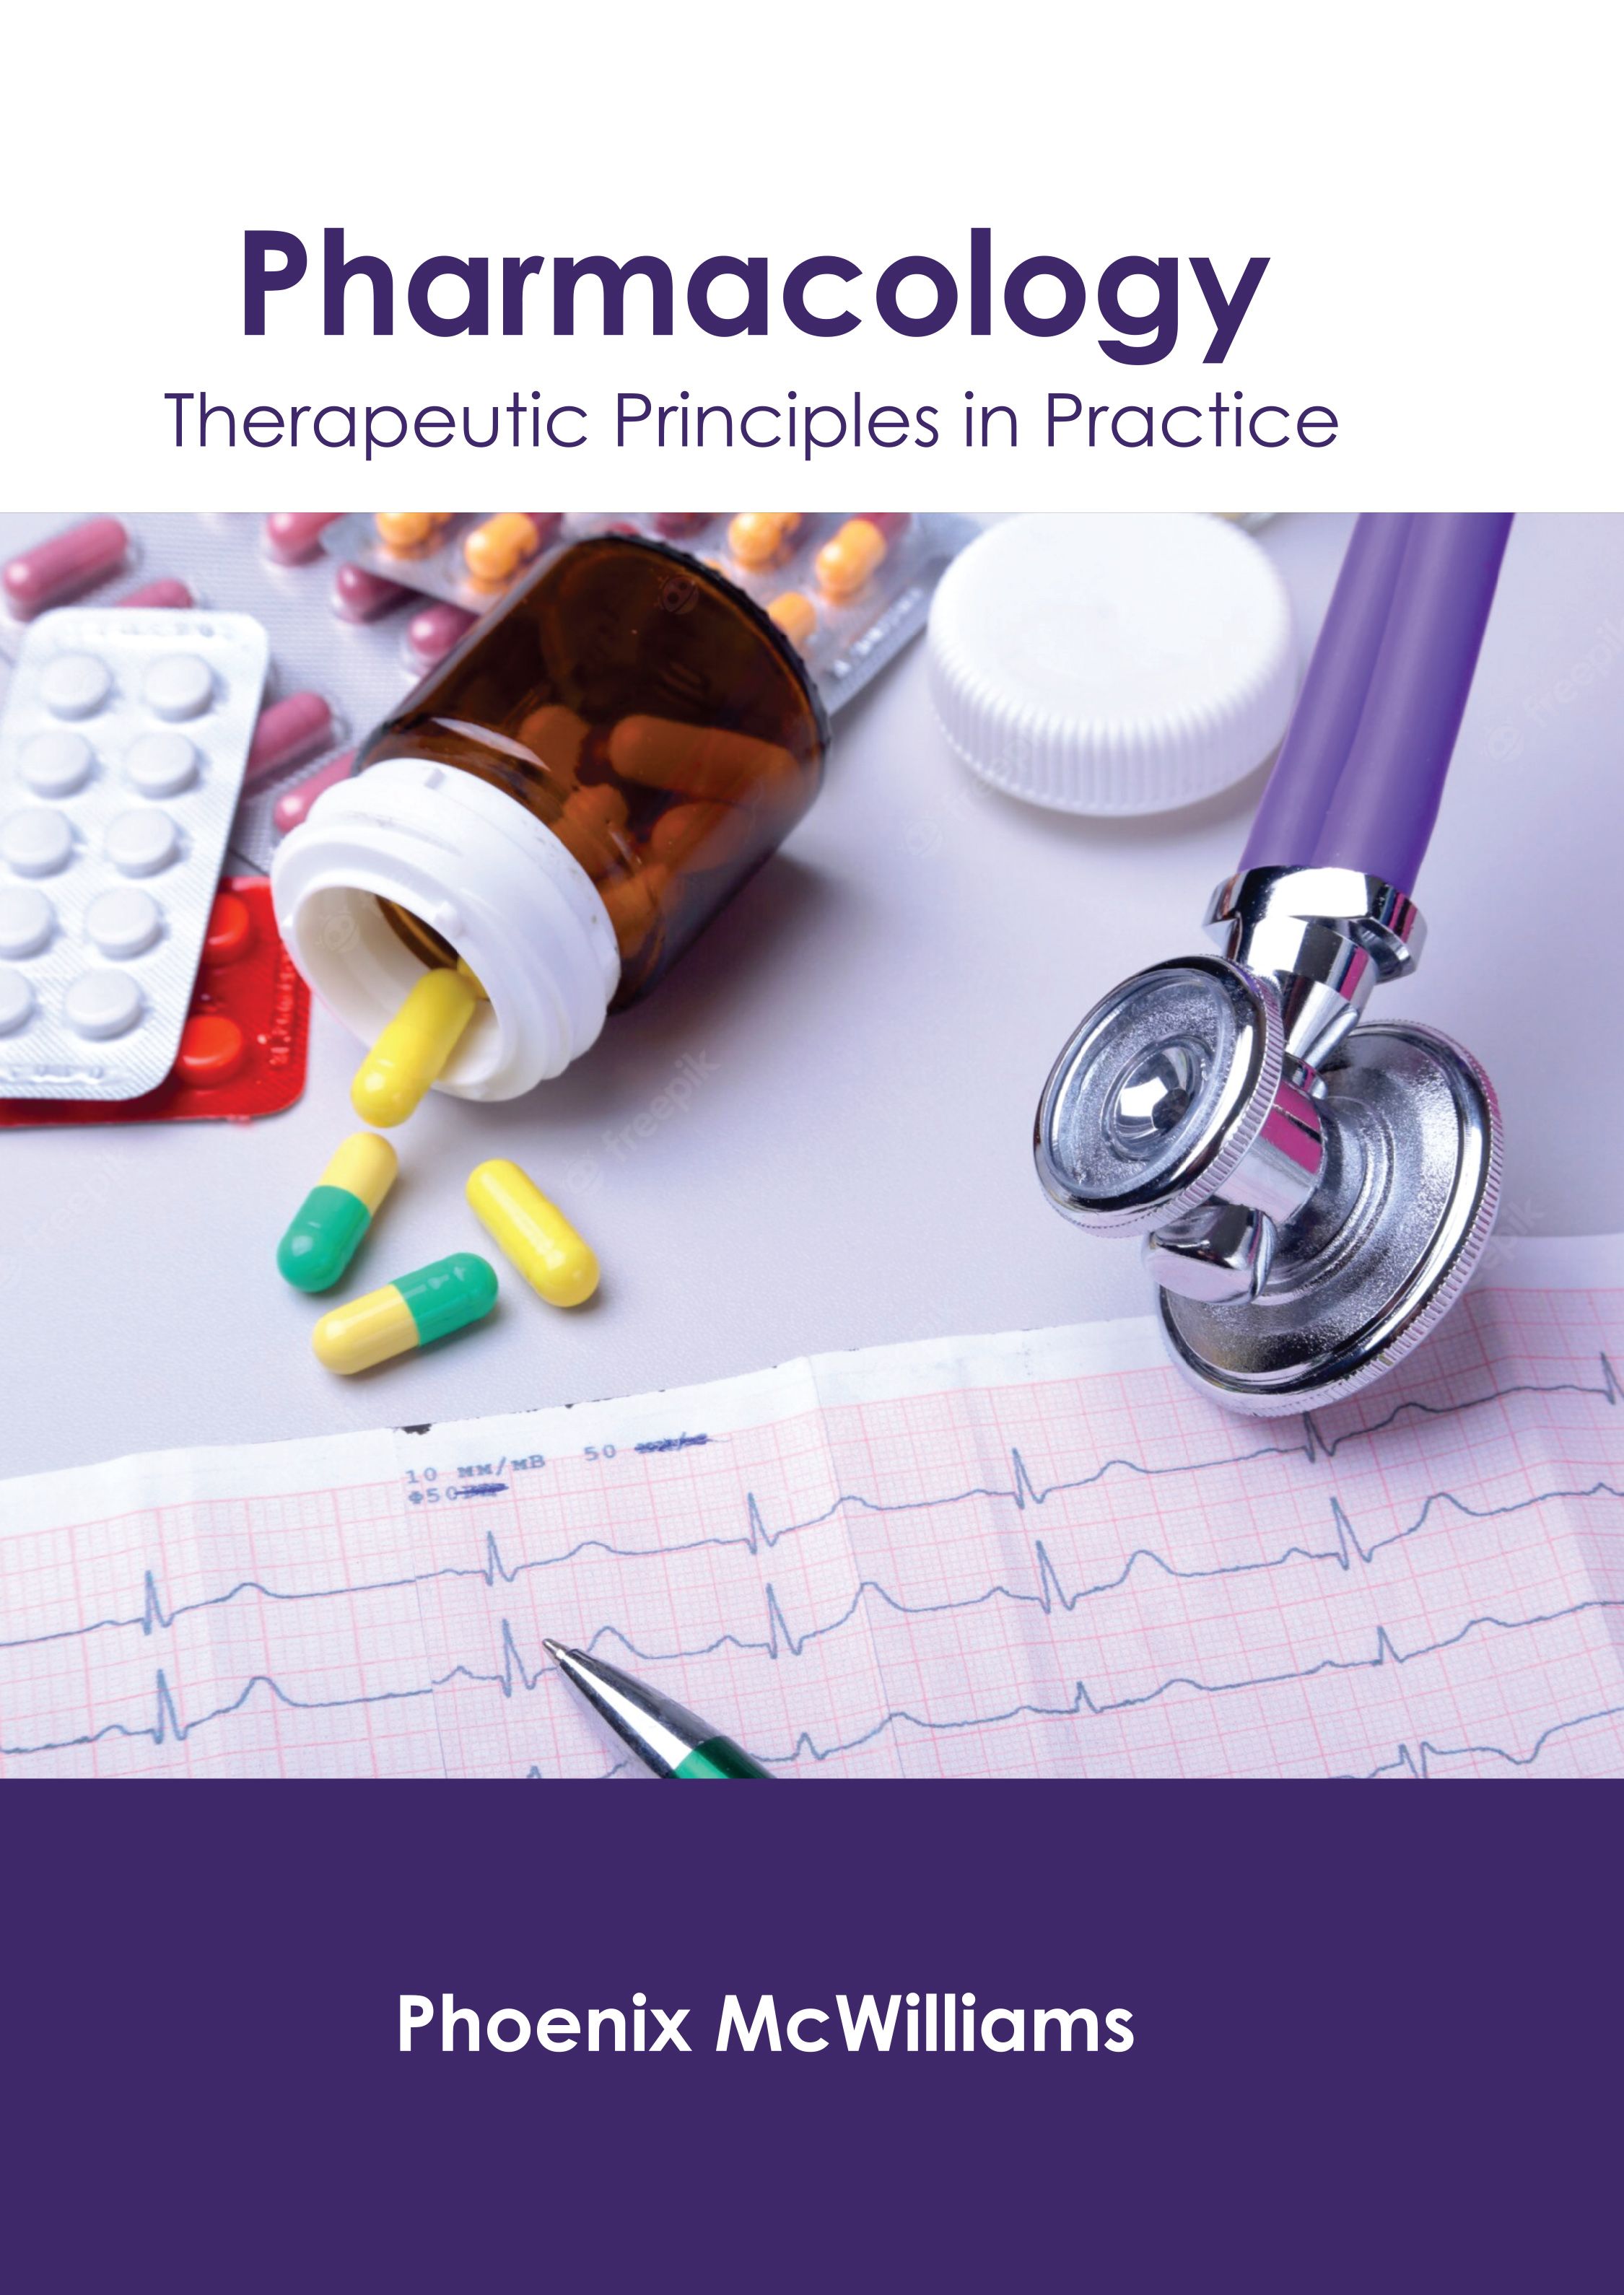 PHARMACOLOGY: THERAPEUTIC PRINCIPLES IN PRACTICE